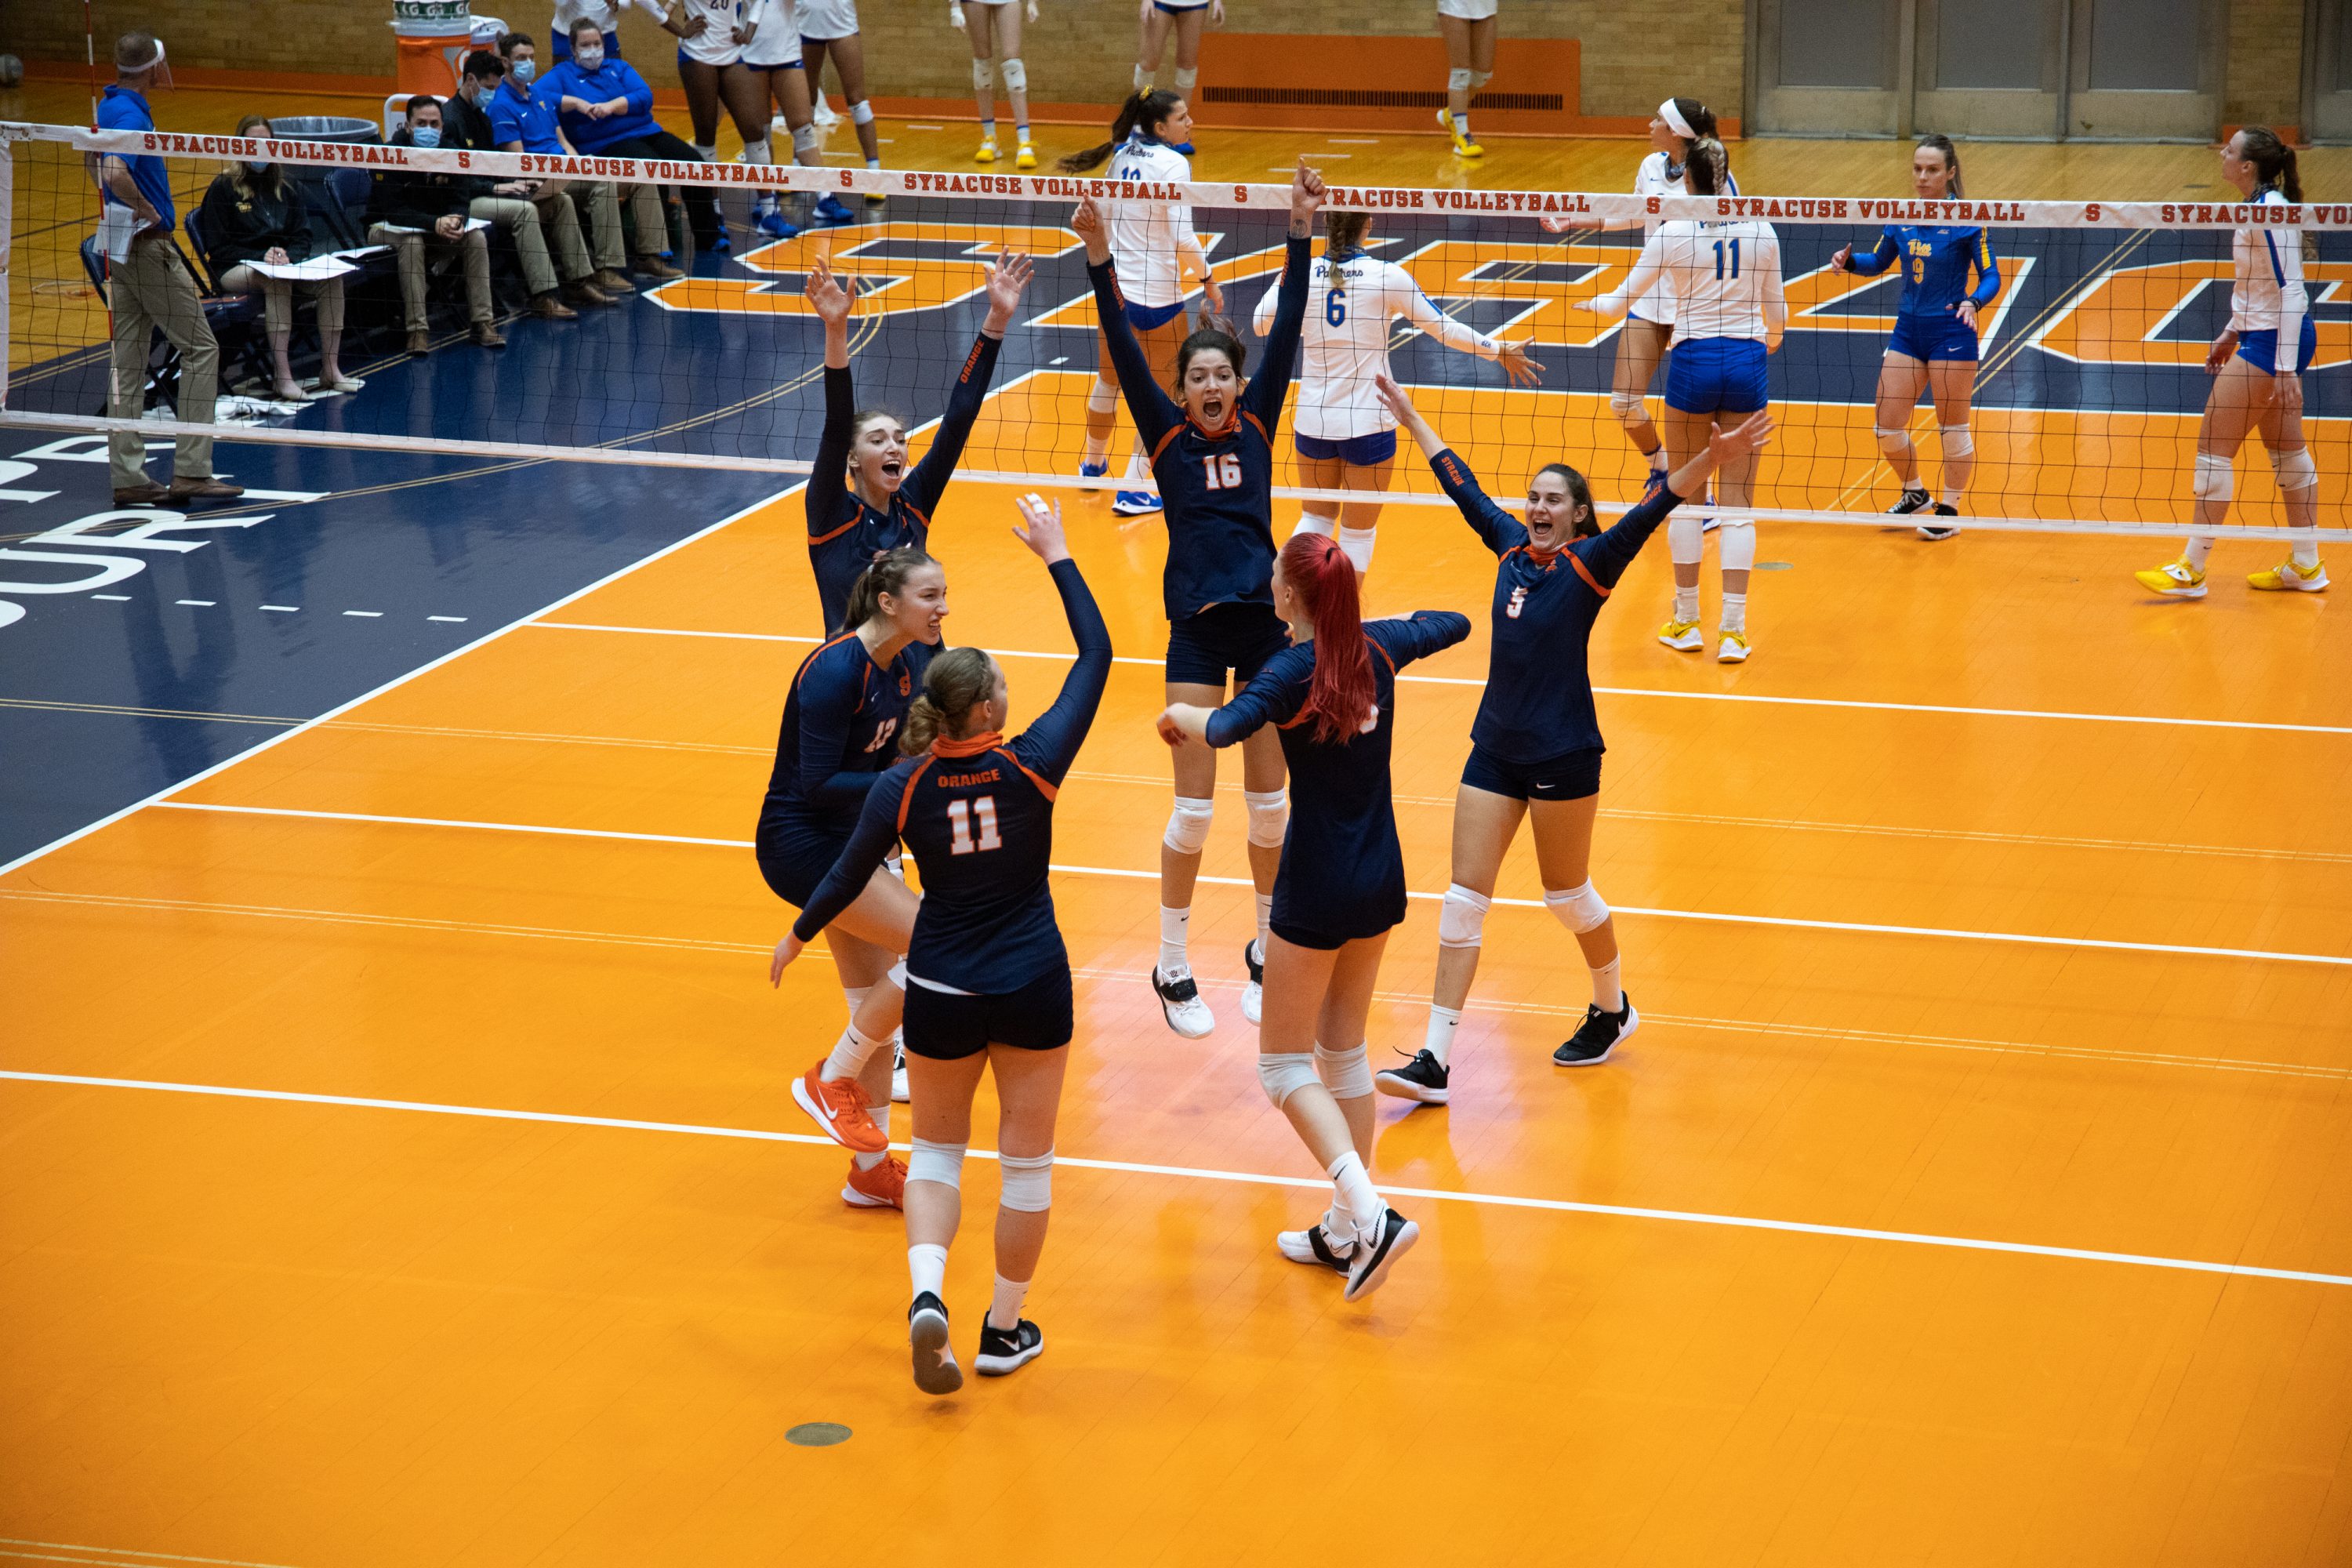 The Syracuse volleyball team celebrates after scoring a point against Pitt during their three-set win on Saturday.